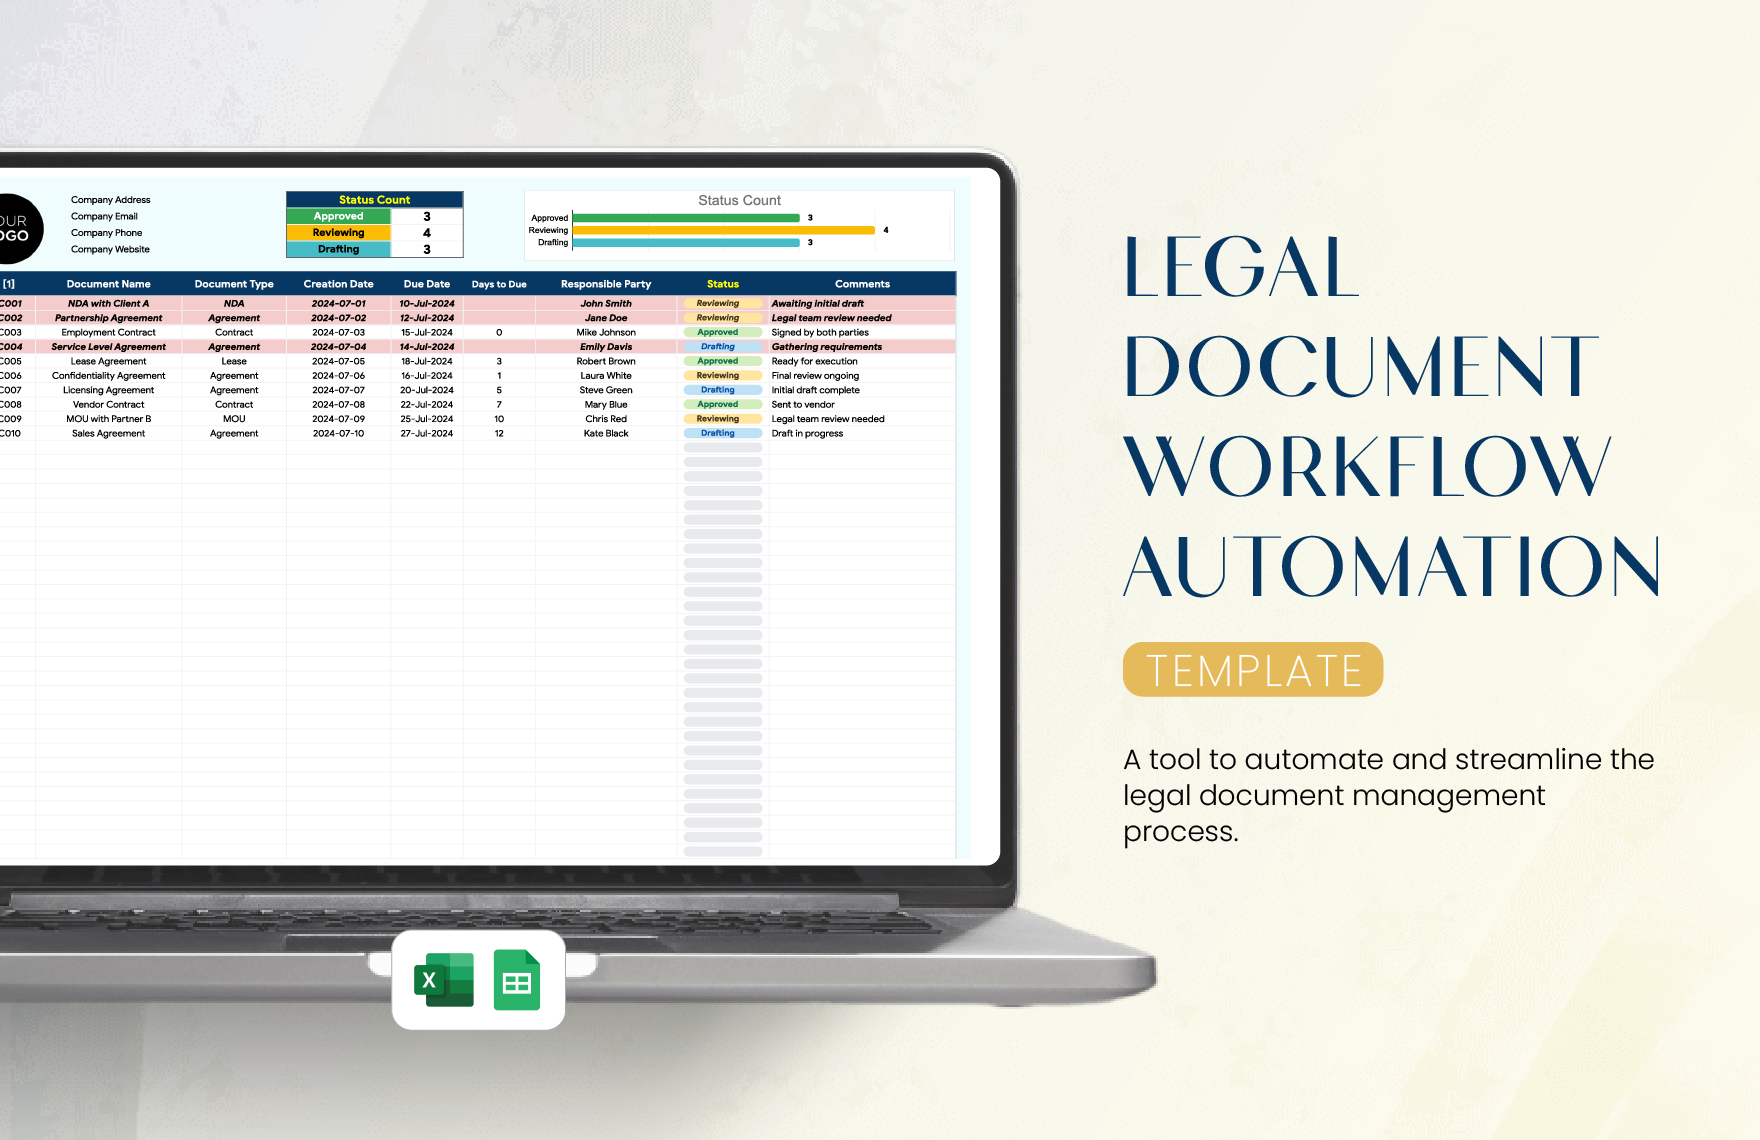 Legal Document Workflow Automation Template in Excel, Google Sheets